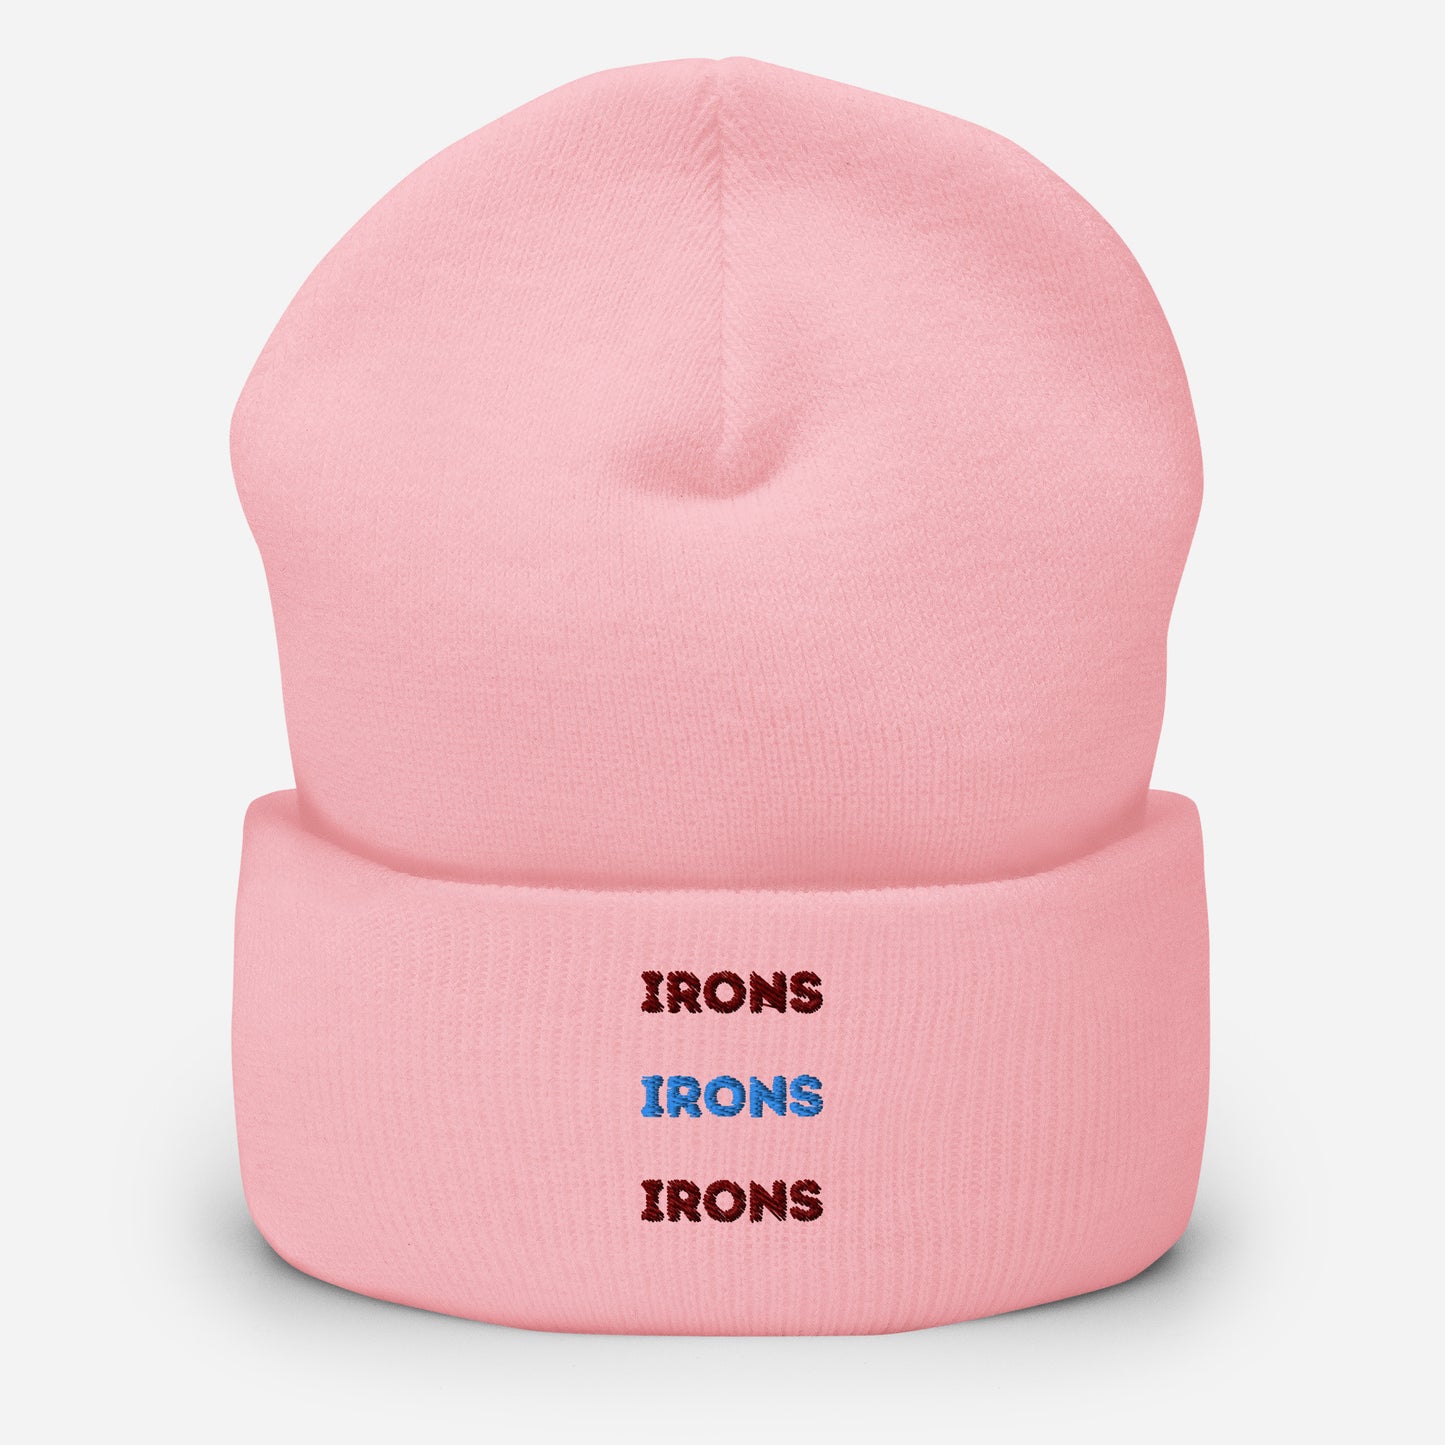 Irons Irons Irons Cuffed Beanie Hat